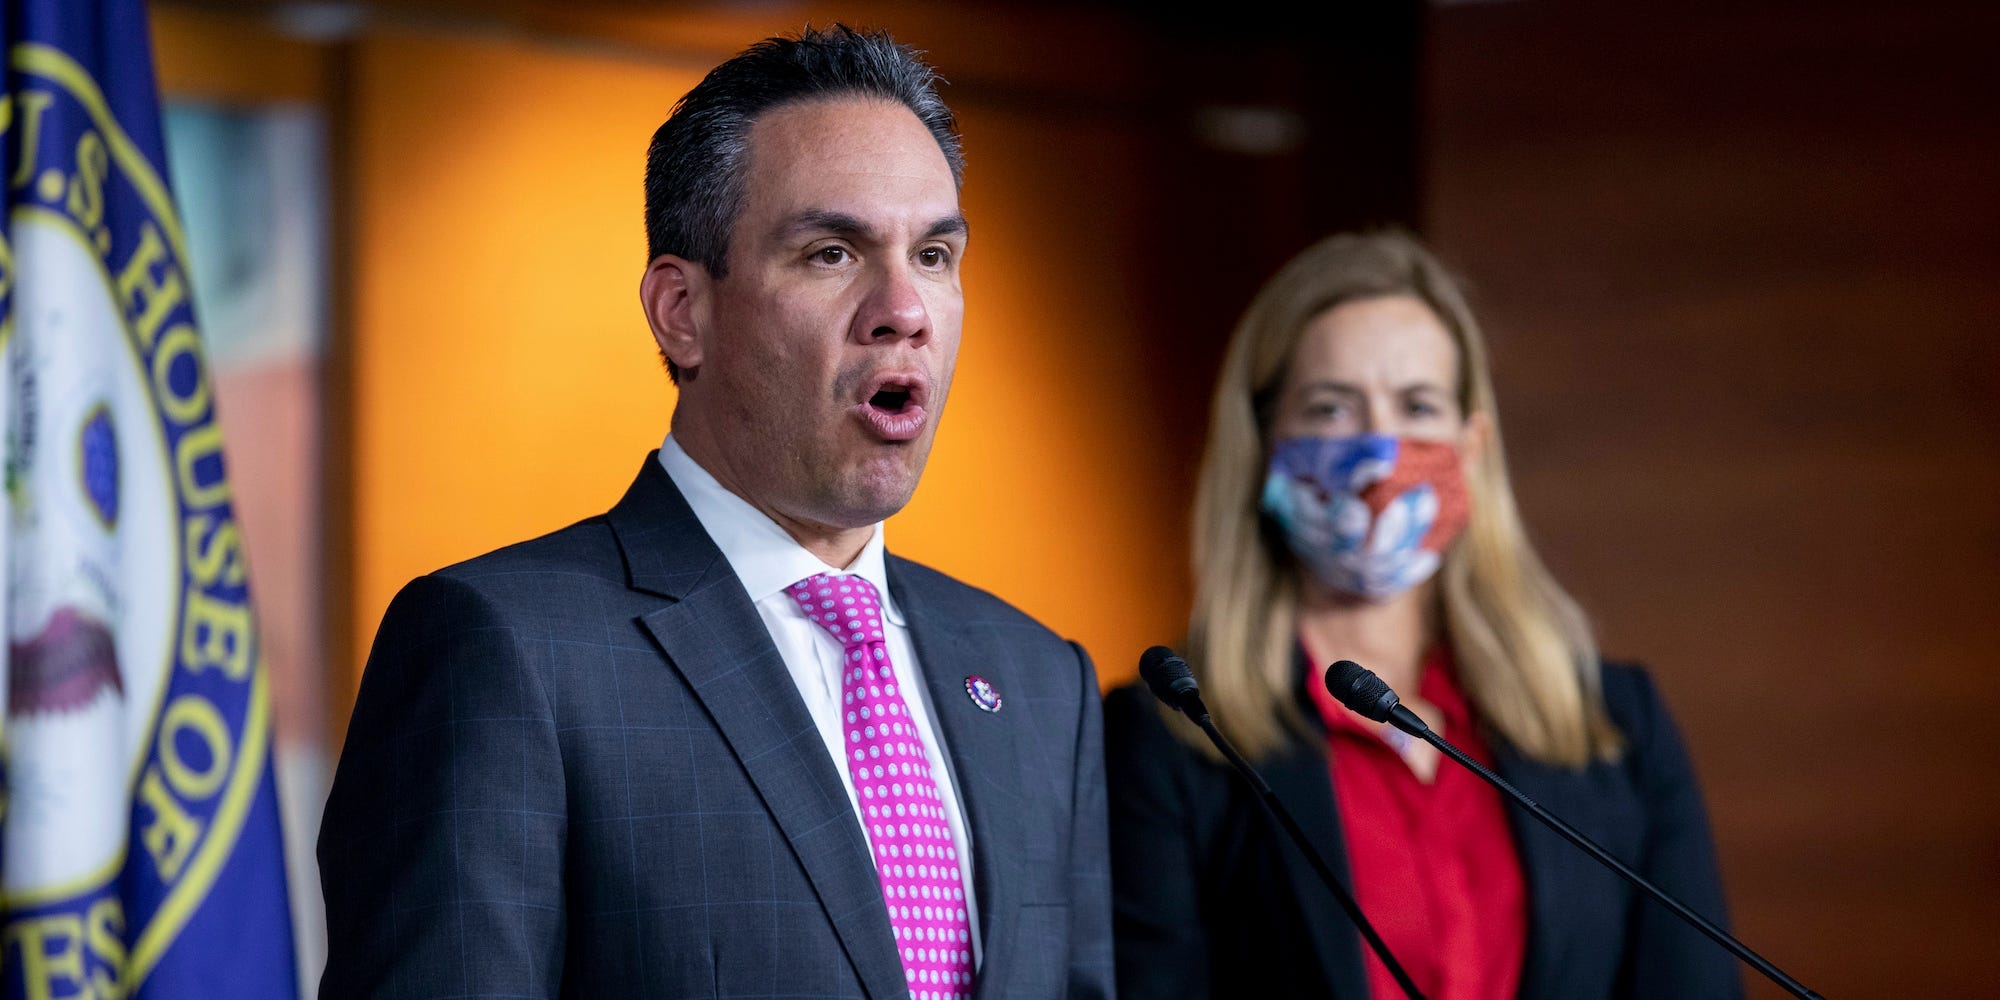 Rep. Pete Aguilar, D-Calif., speaks to members of the media during a news conference on Capitol Hill in Washington, on Tuesday, Aug. 24, 2021. Rep. Mikie Sherrill, D-N.J., looks on at right.